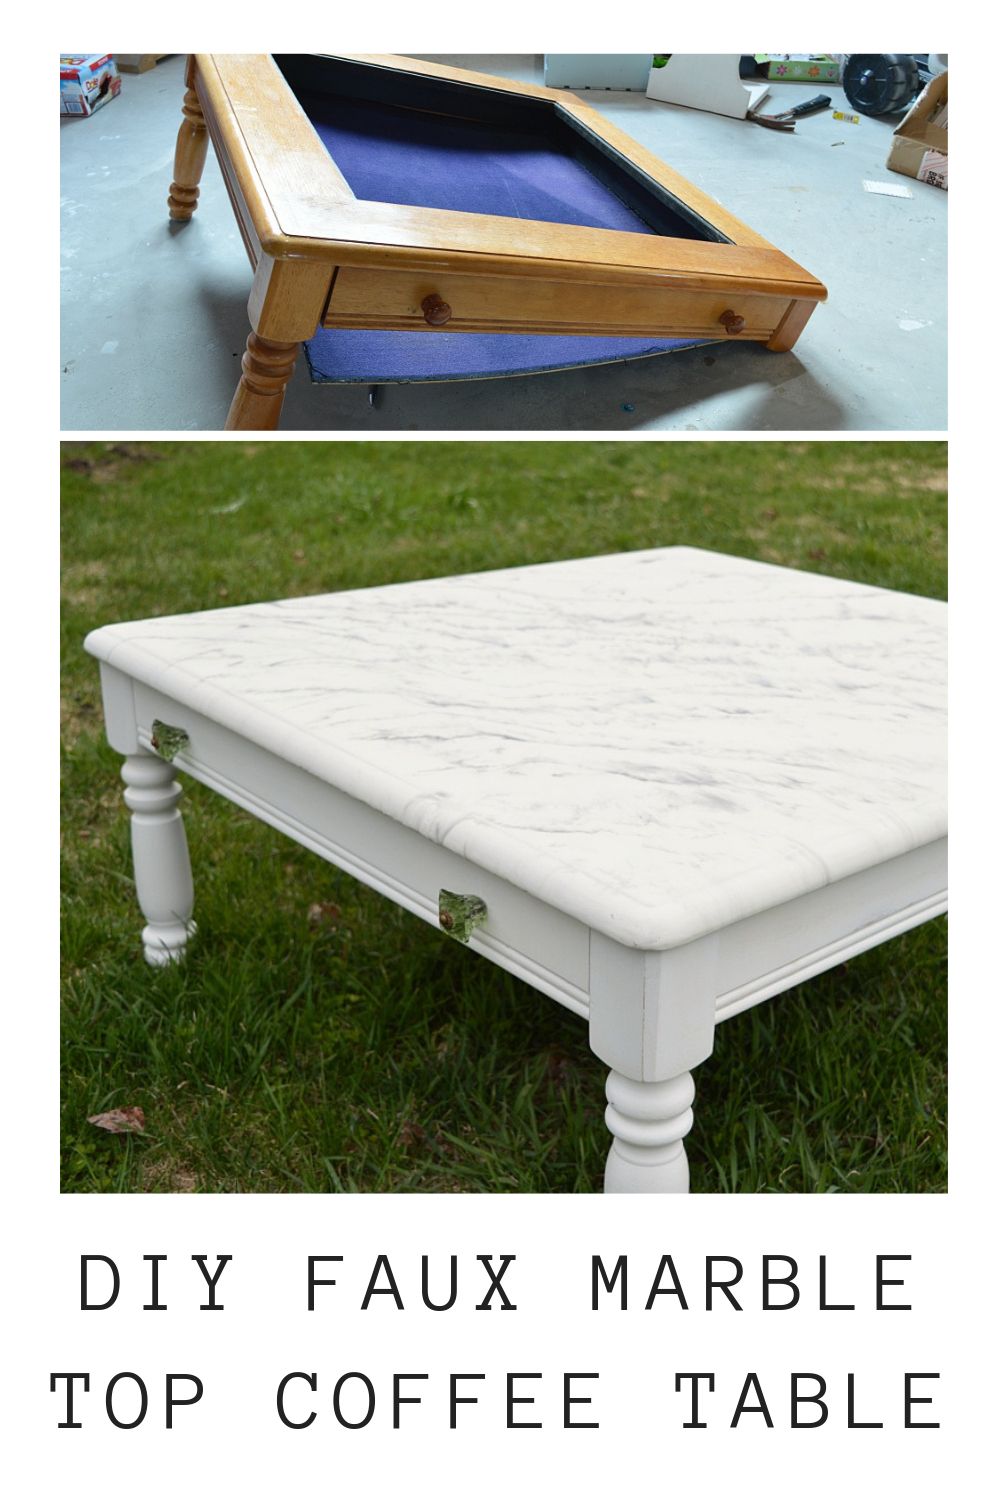 How To Make A Faux Marble Top Coffee Table – The Vanderveen House With Regard To Faux Marble Top Coffee Tables (View 18 of 20)